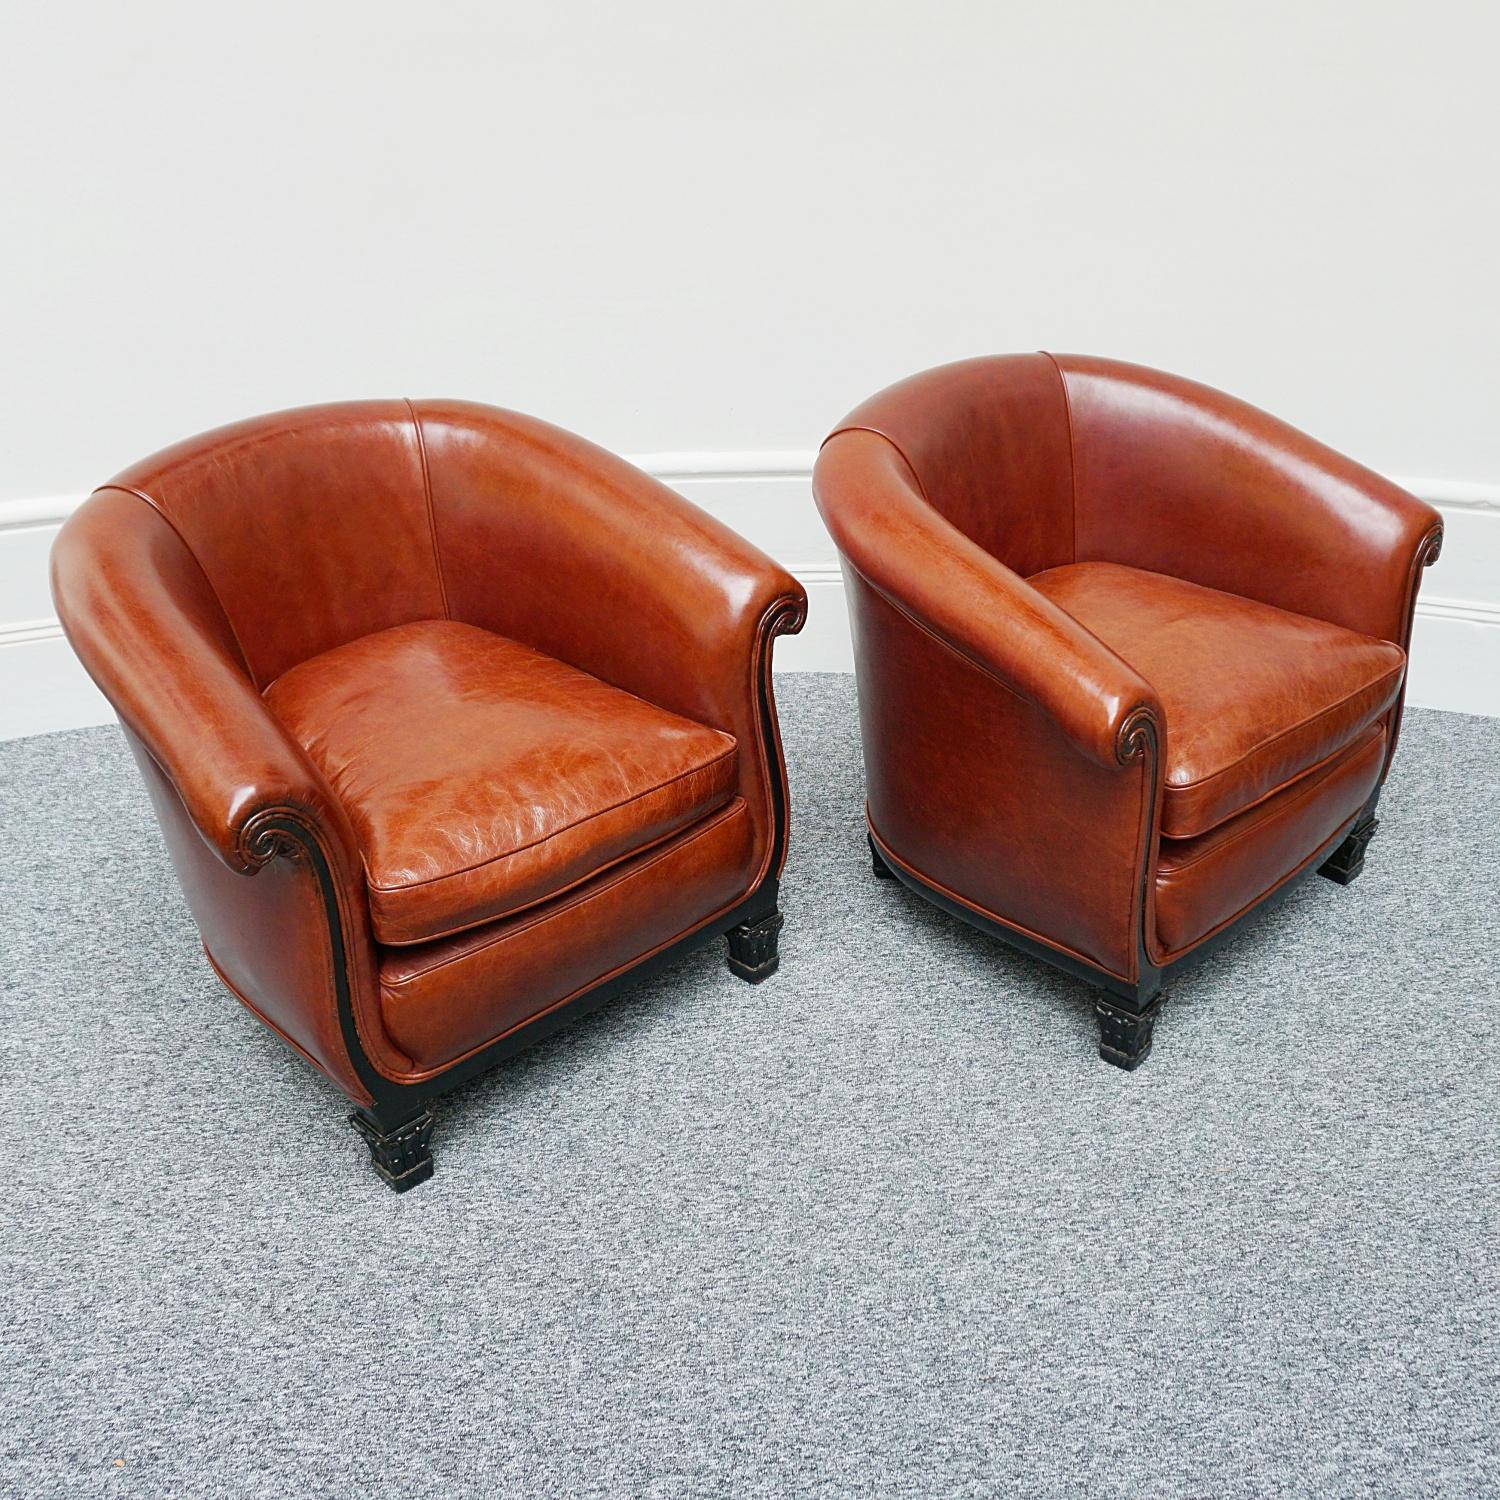 Pair of French Art Deco Club Chairs Re-Upholstered in Chestnut Leather 1